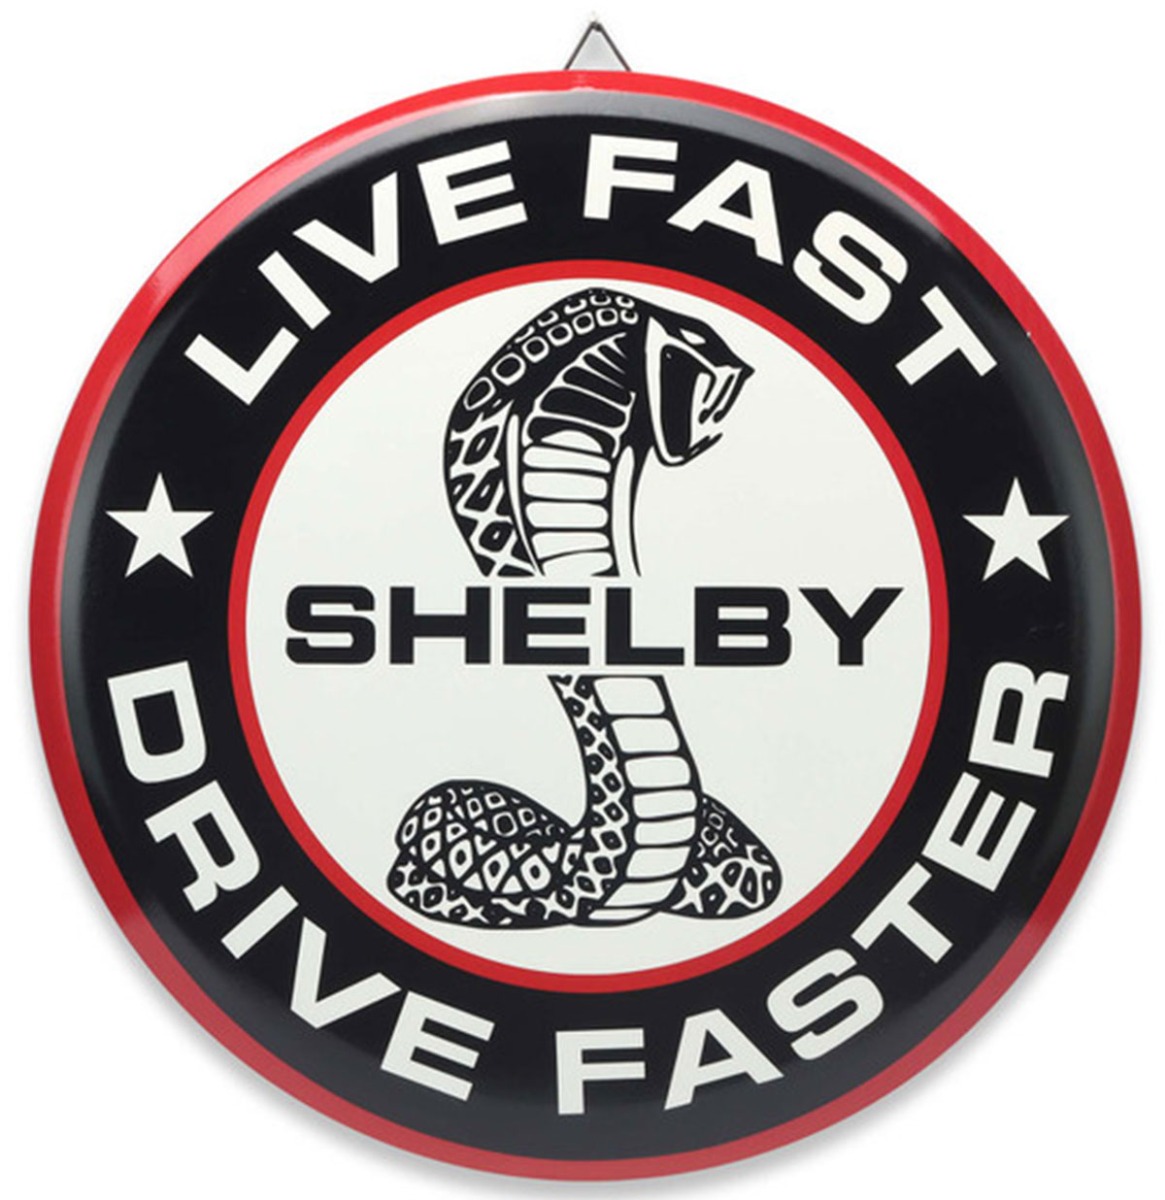 Fiftiesstore Shelby Live Fast Drive Faster Rond Metalen Bord - Ø62cm